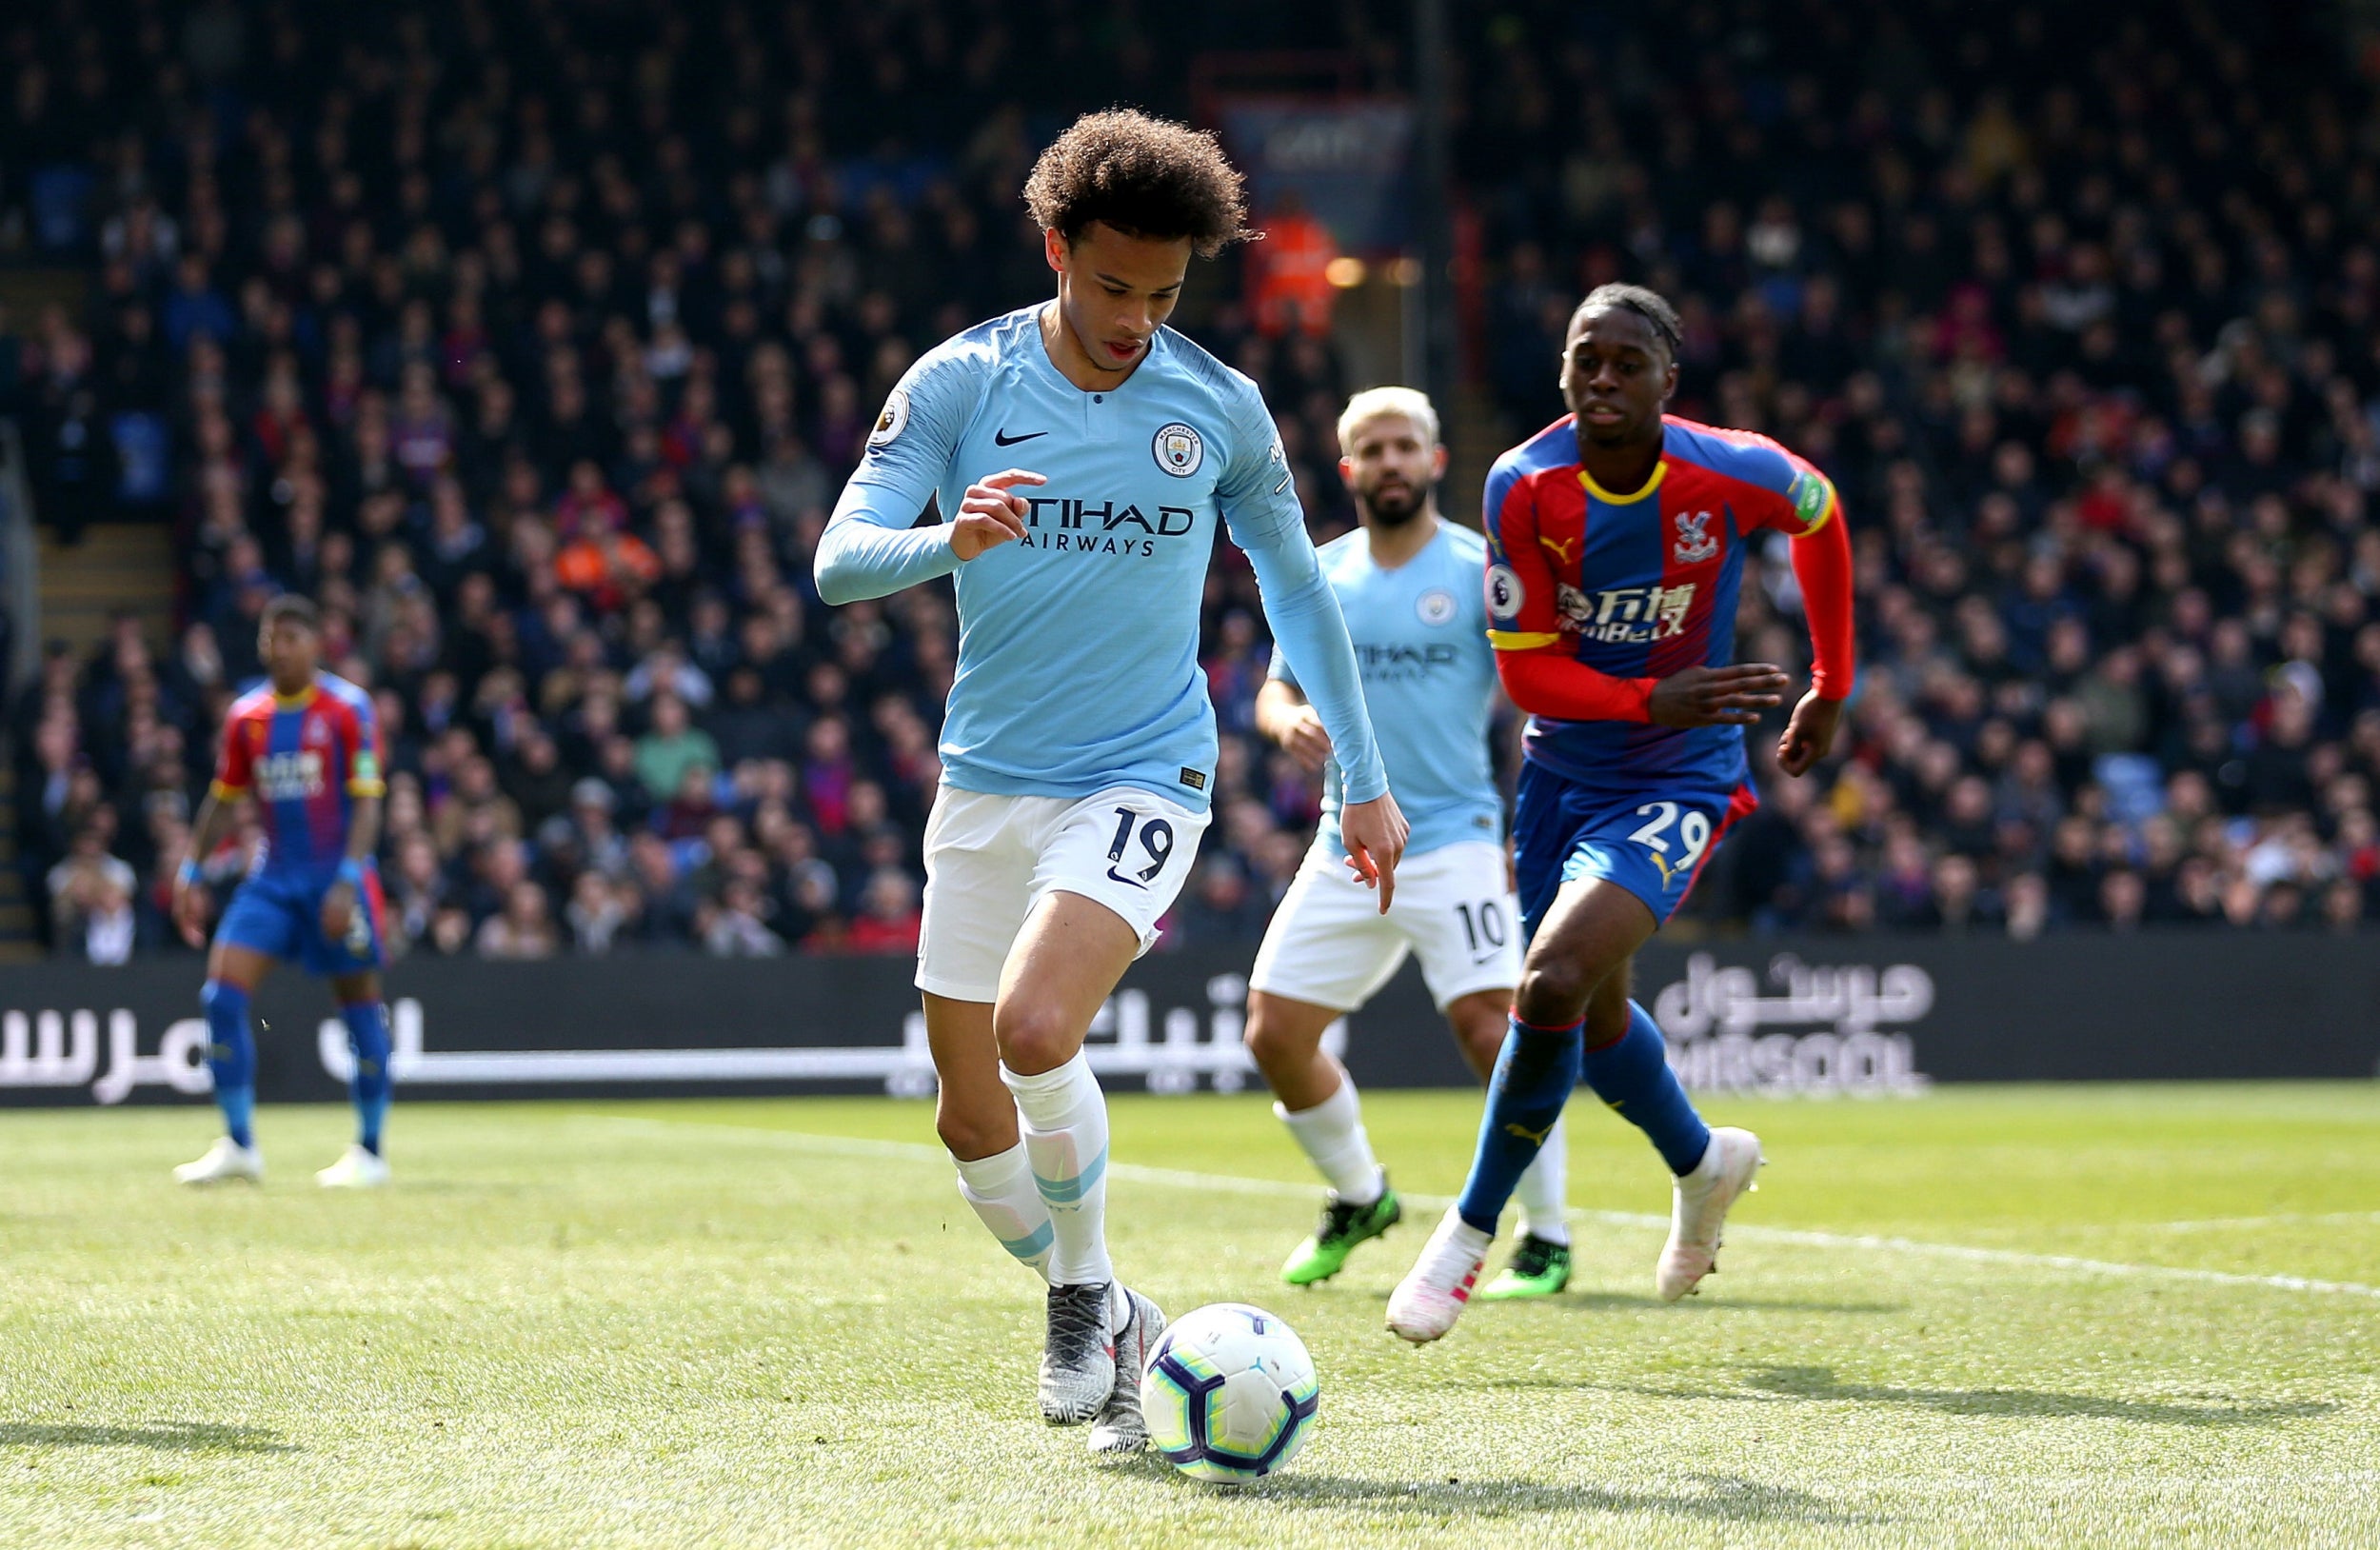 Leroy Sane was given a rare start by Pep Guardiola